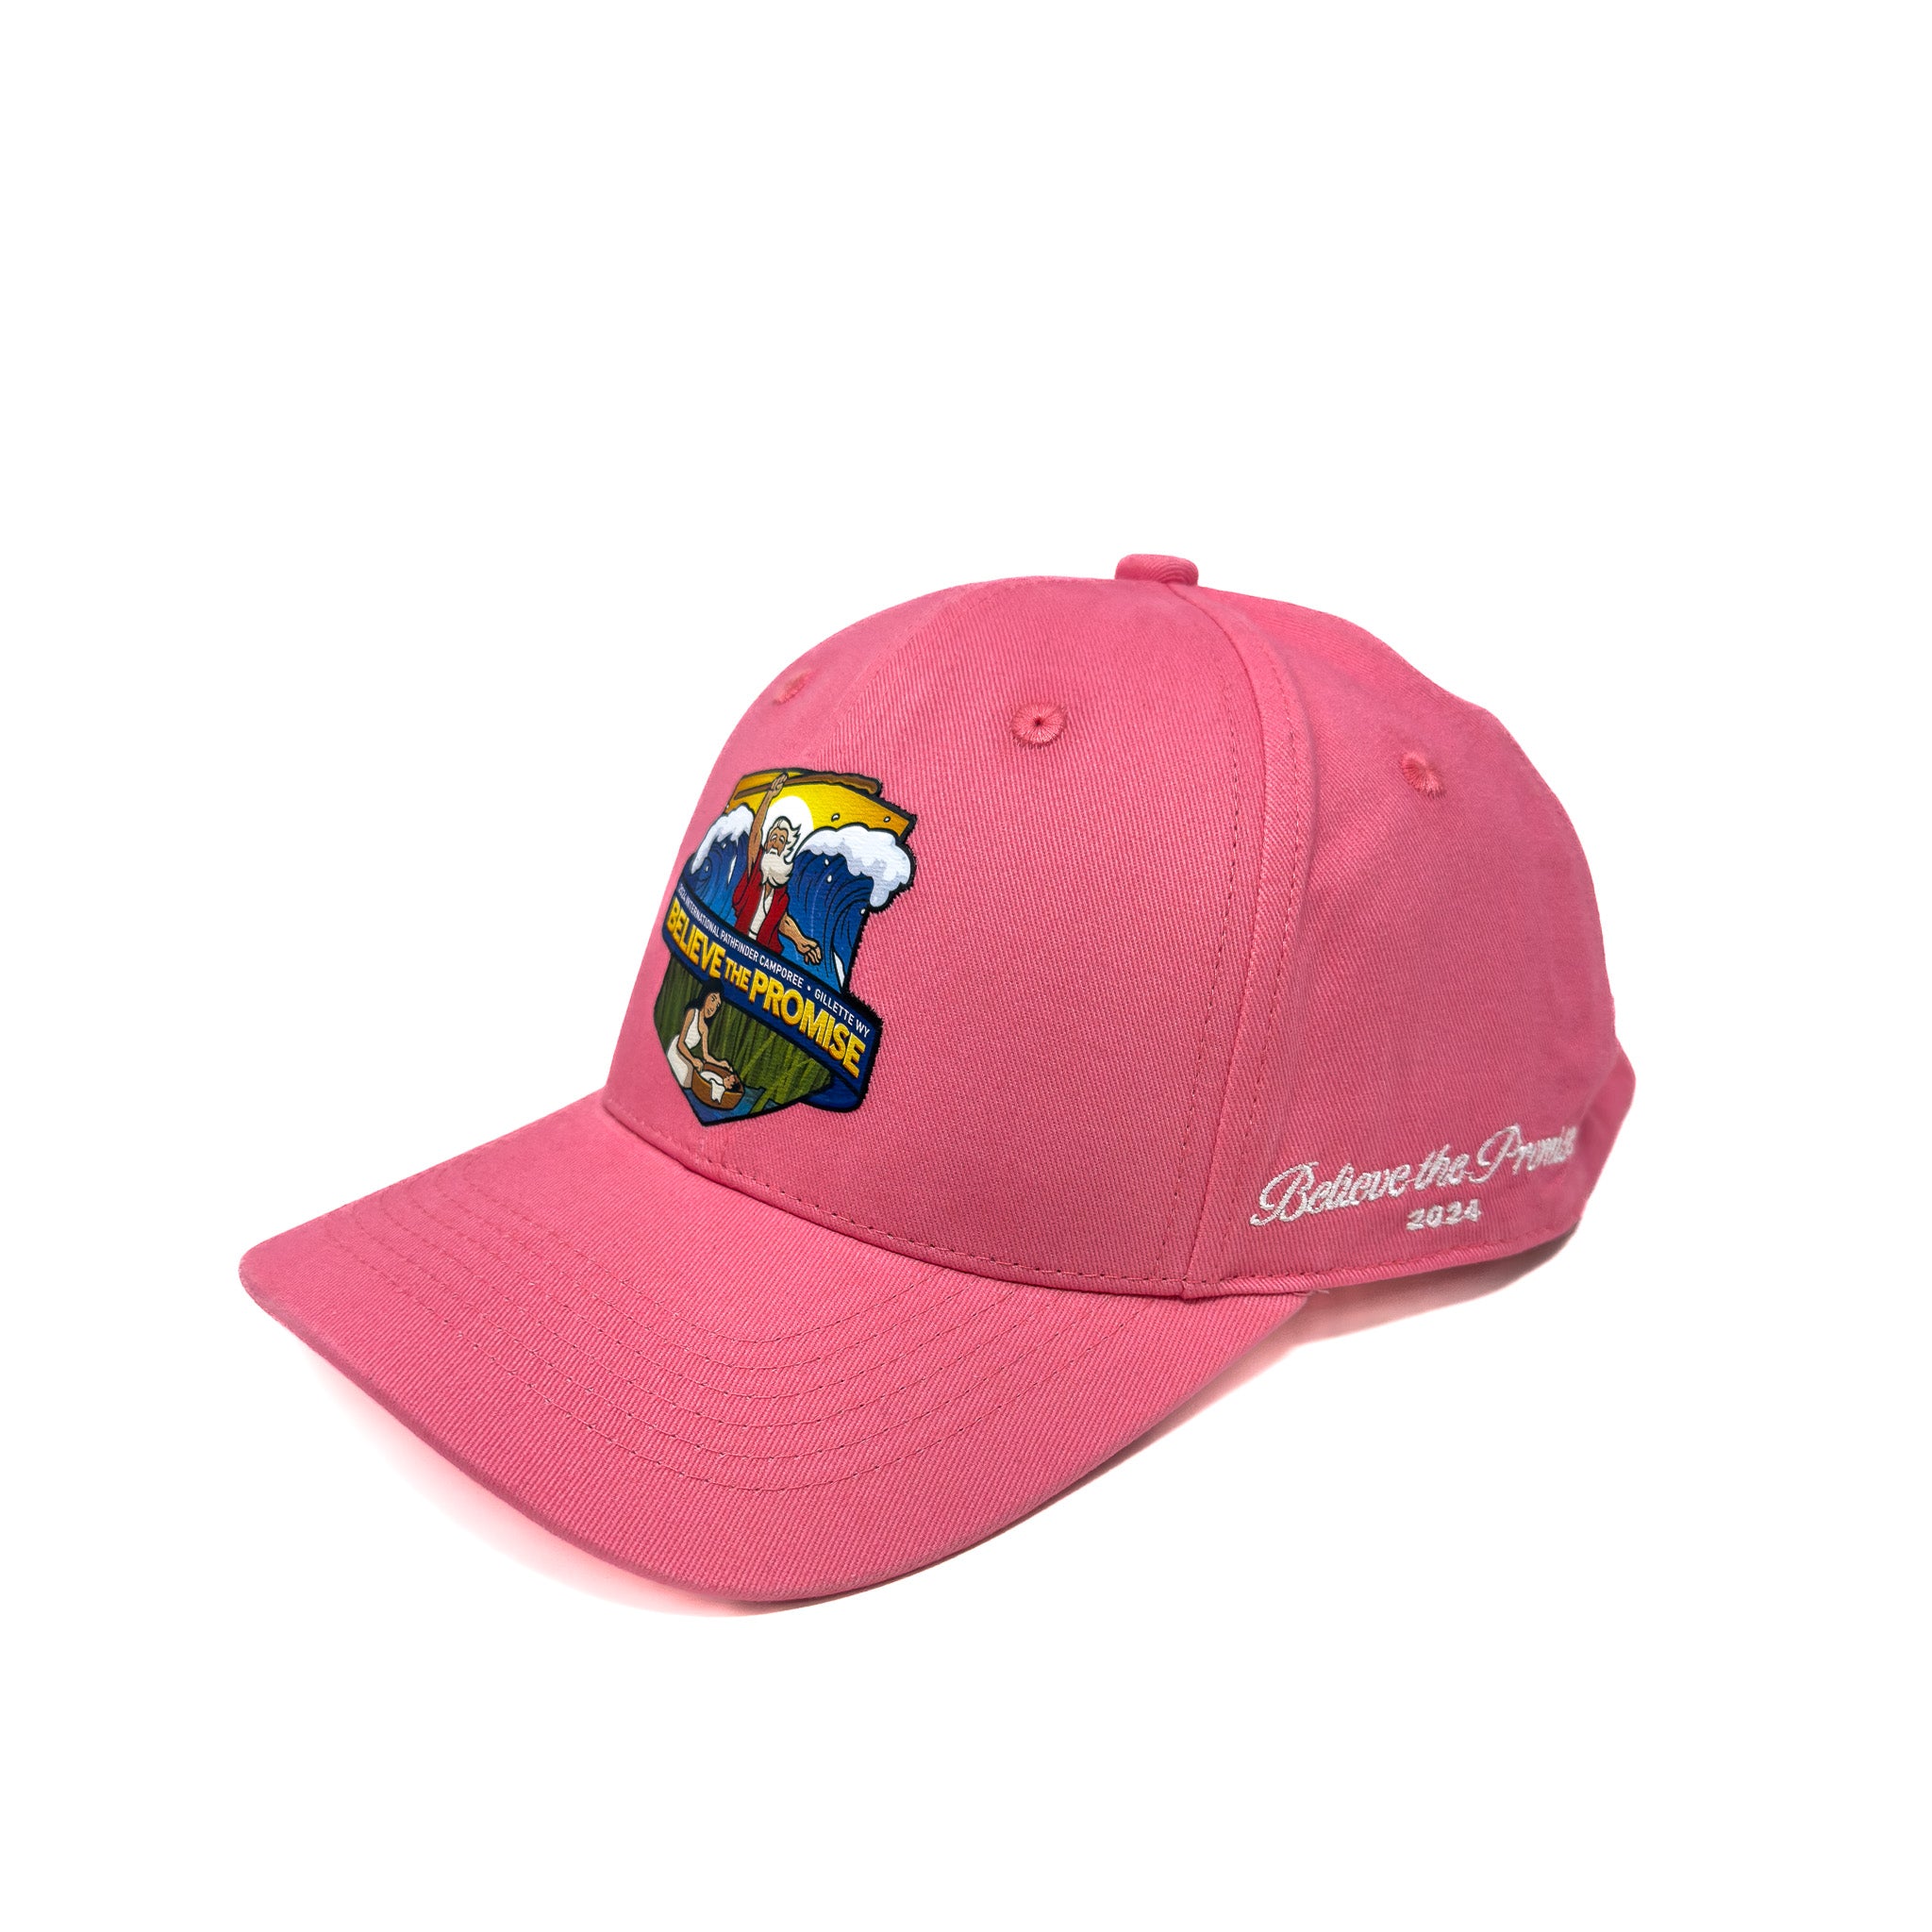 Believe the Promise 2024 Cap (Pink)